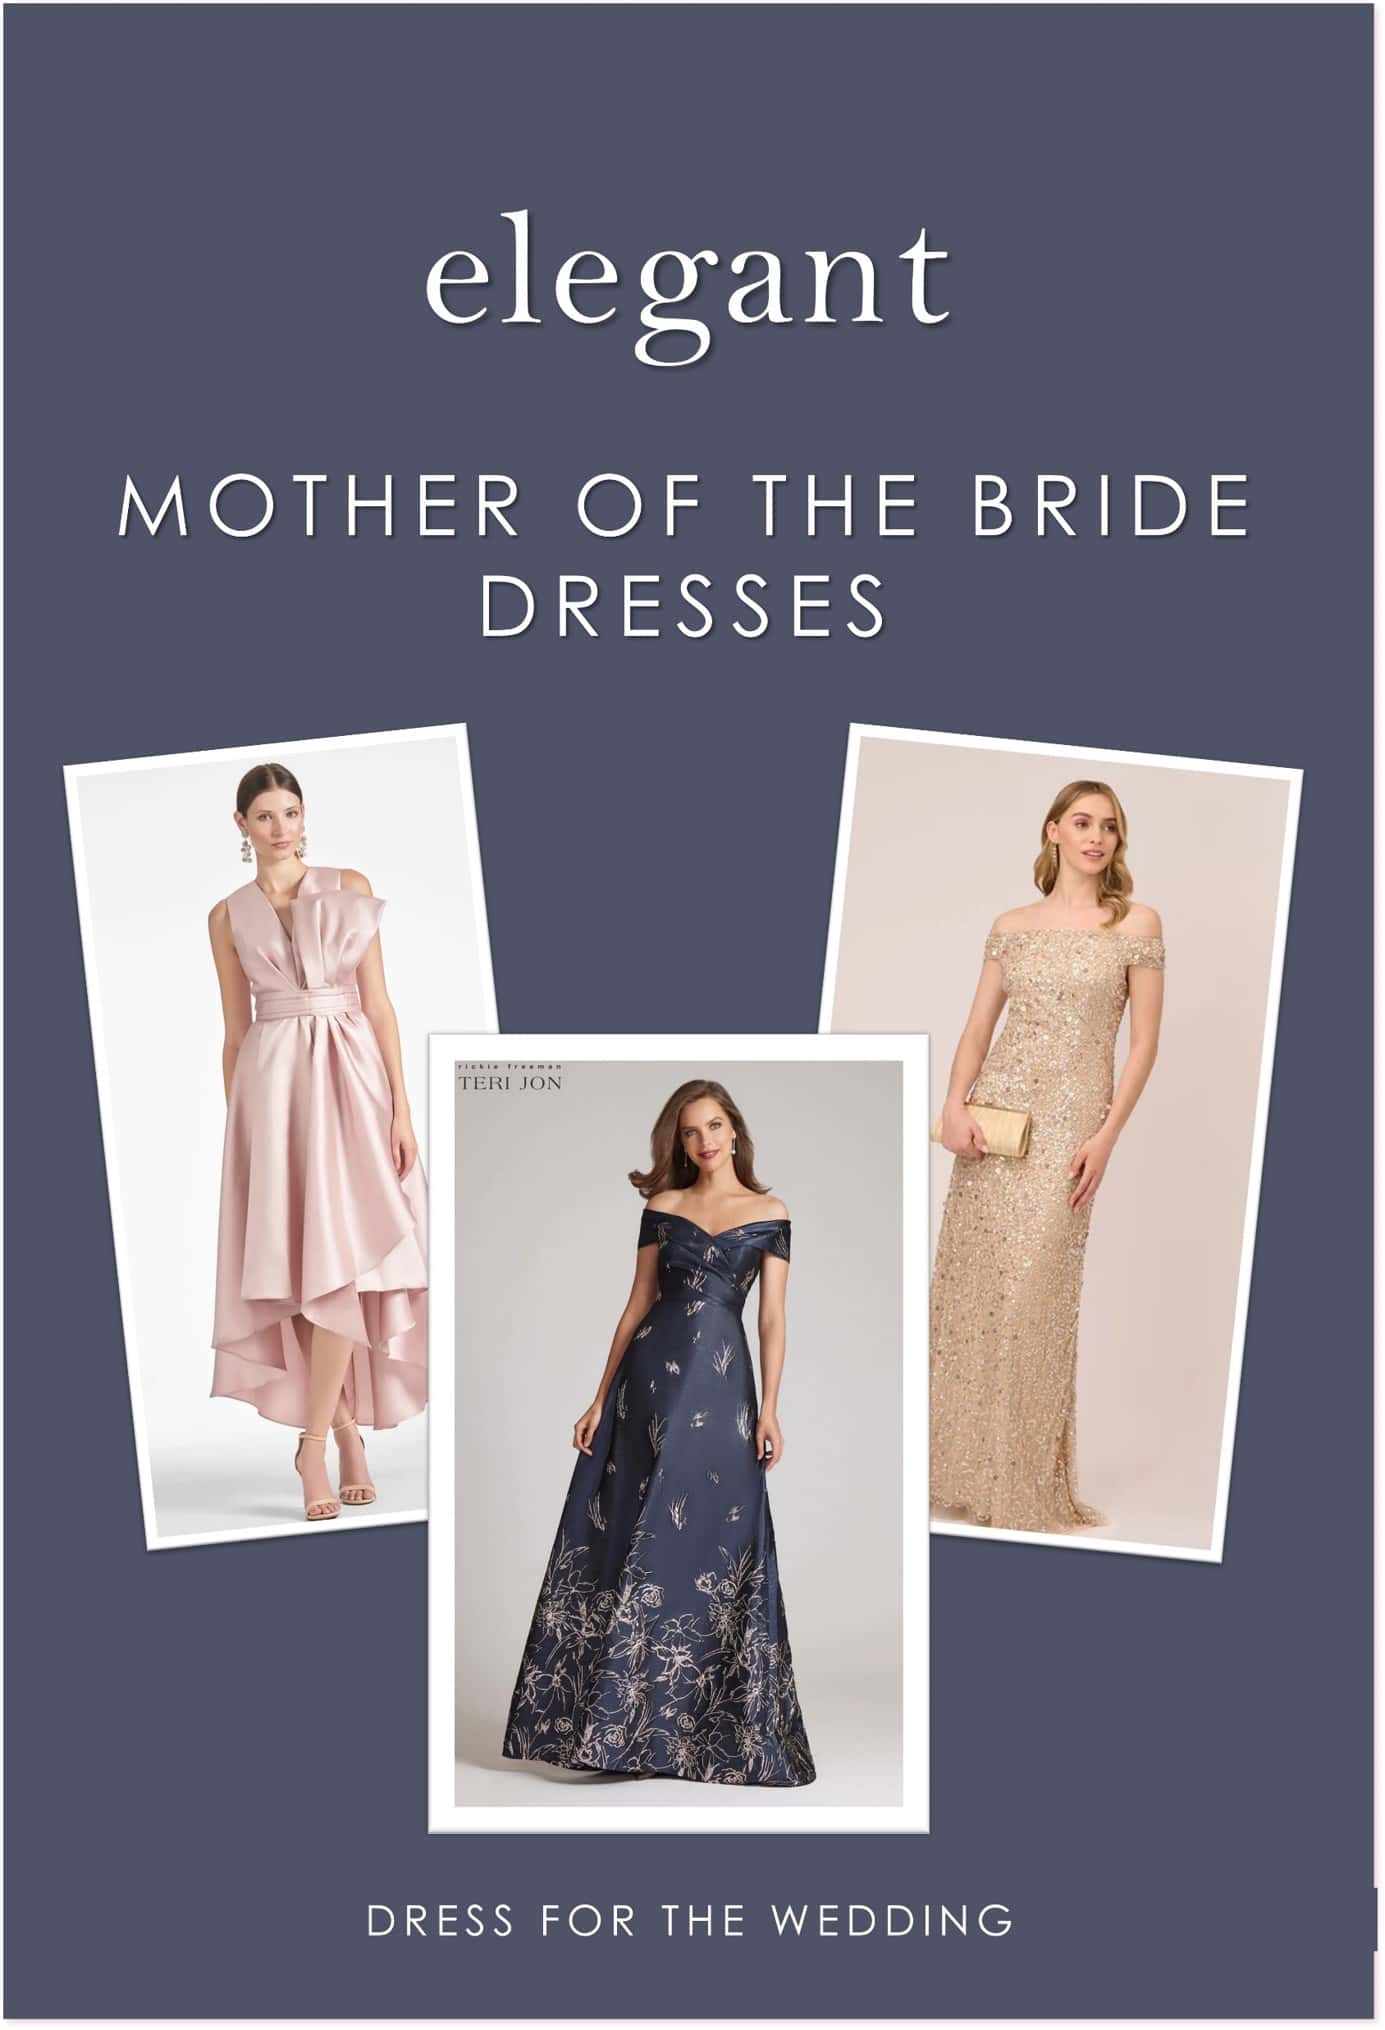 Mother of the Bride or Groom Dresses - Dressed for My Day